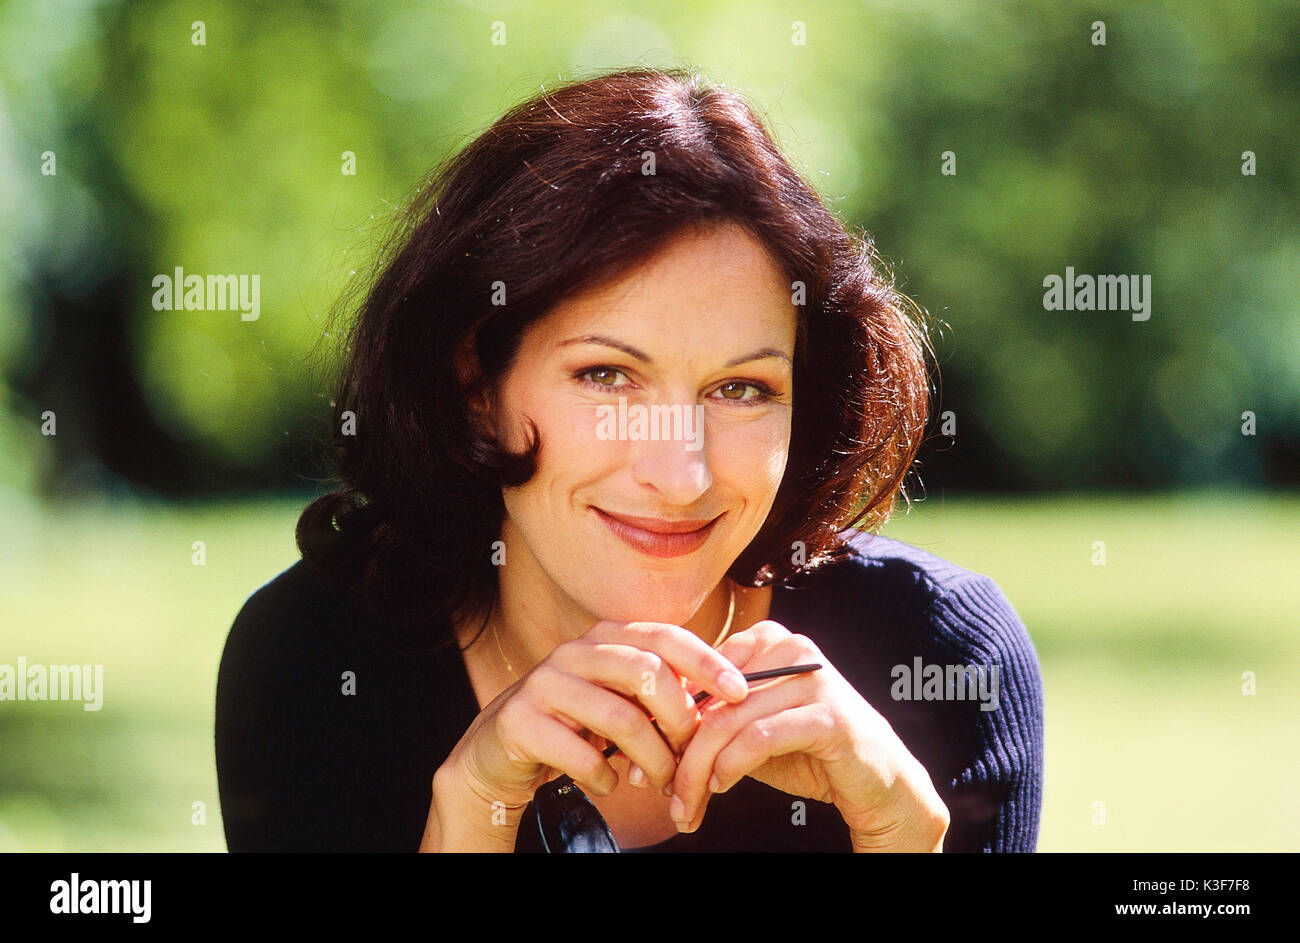 Portrait of smiling, dark-haired woman Stock Photo